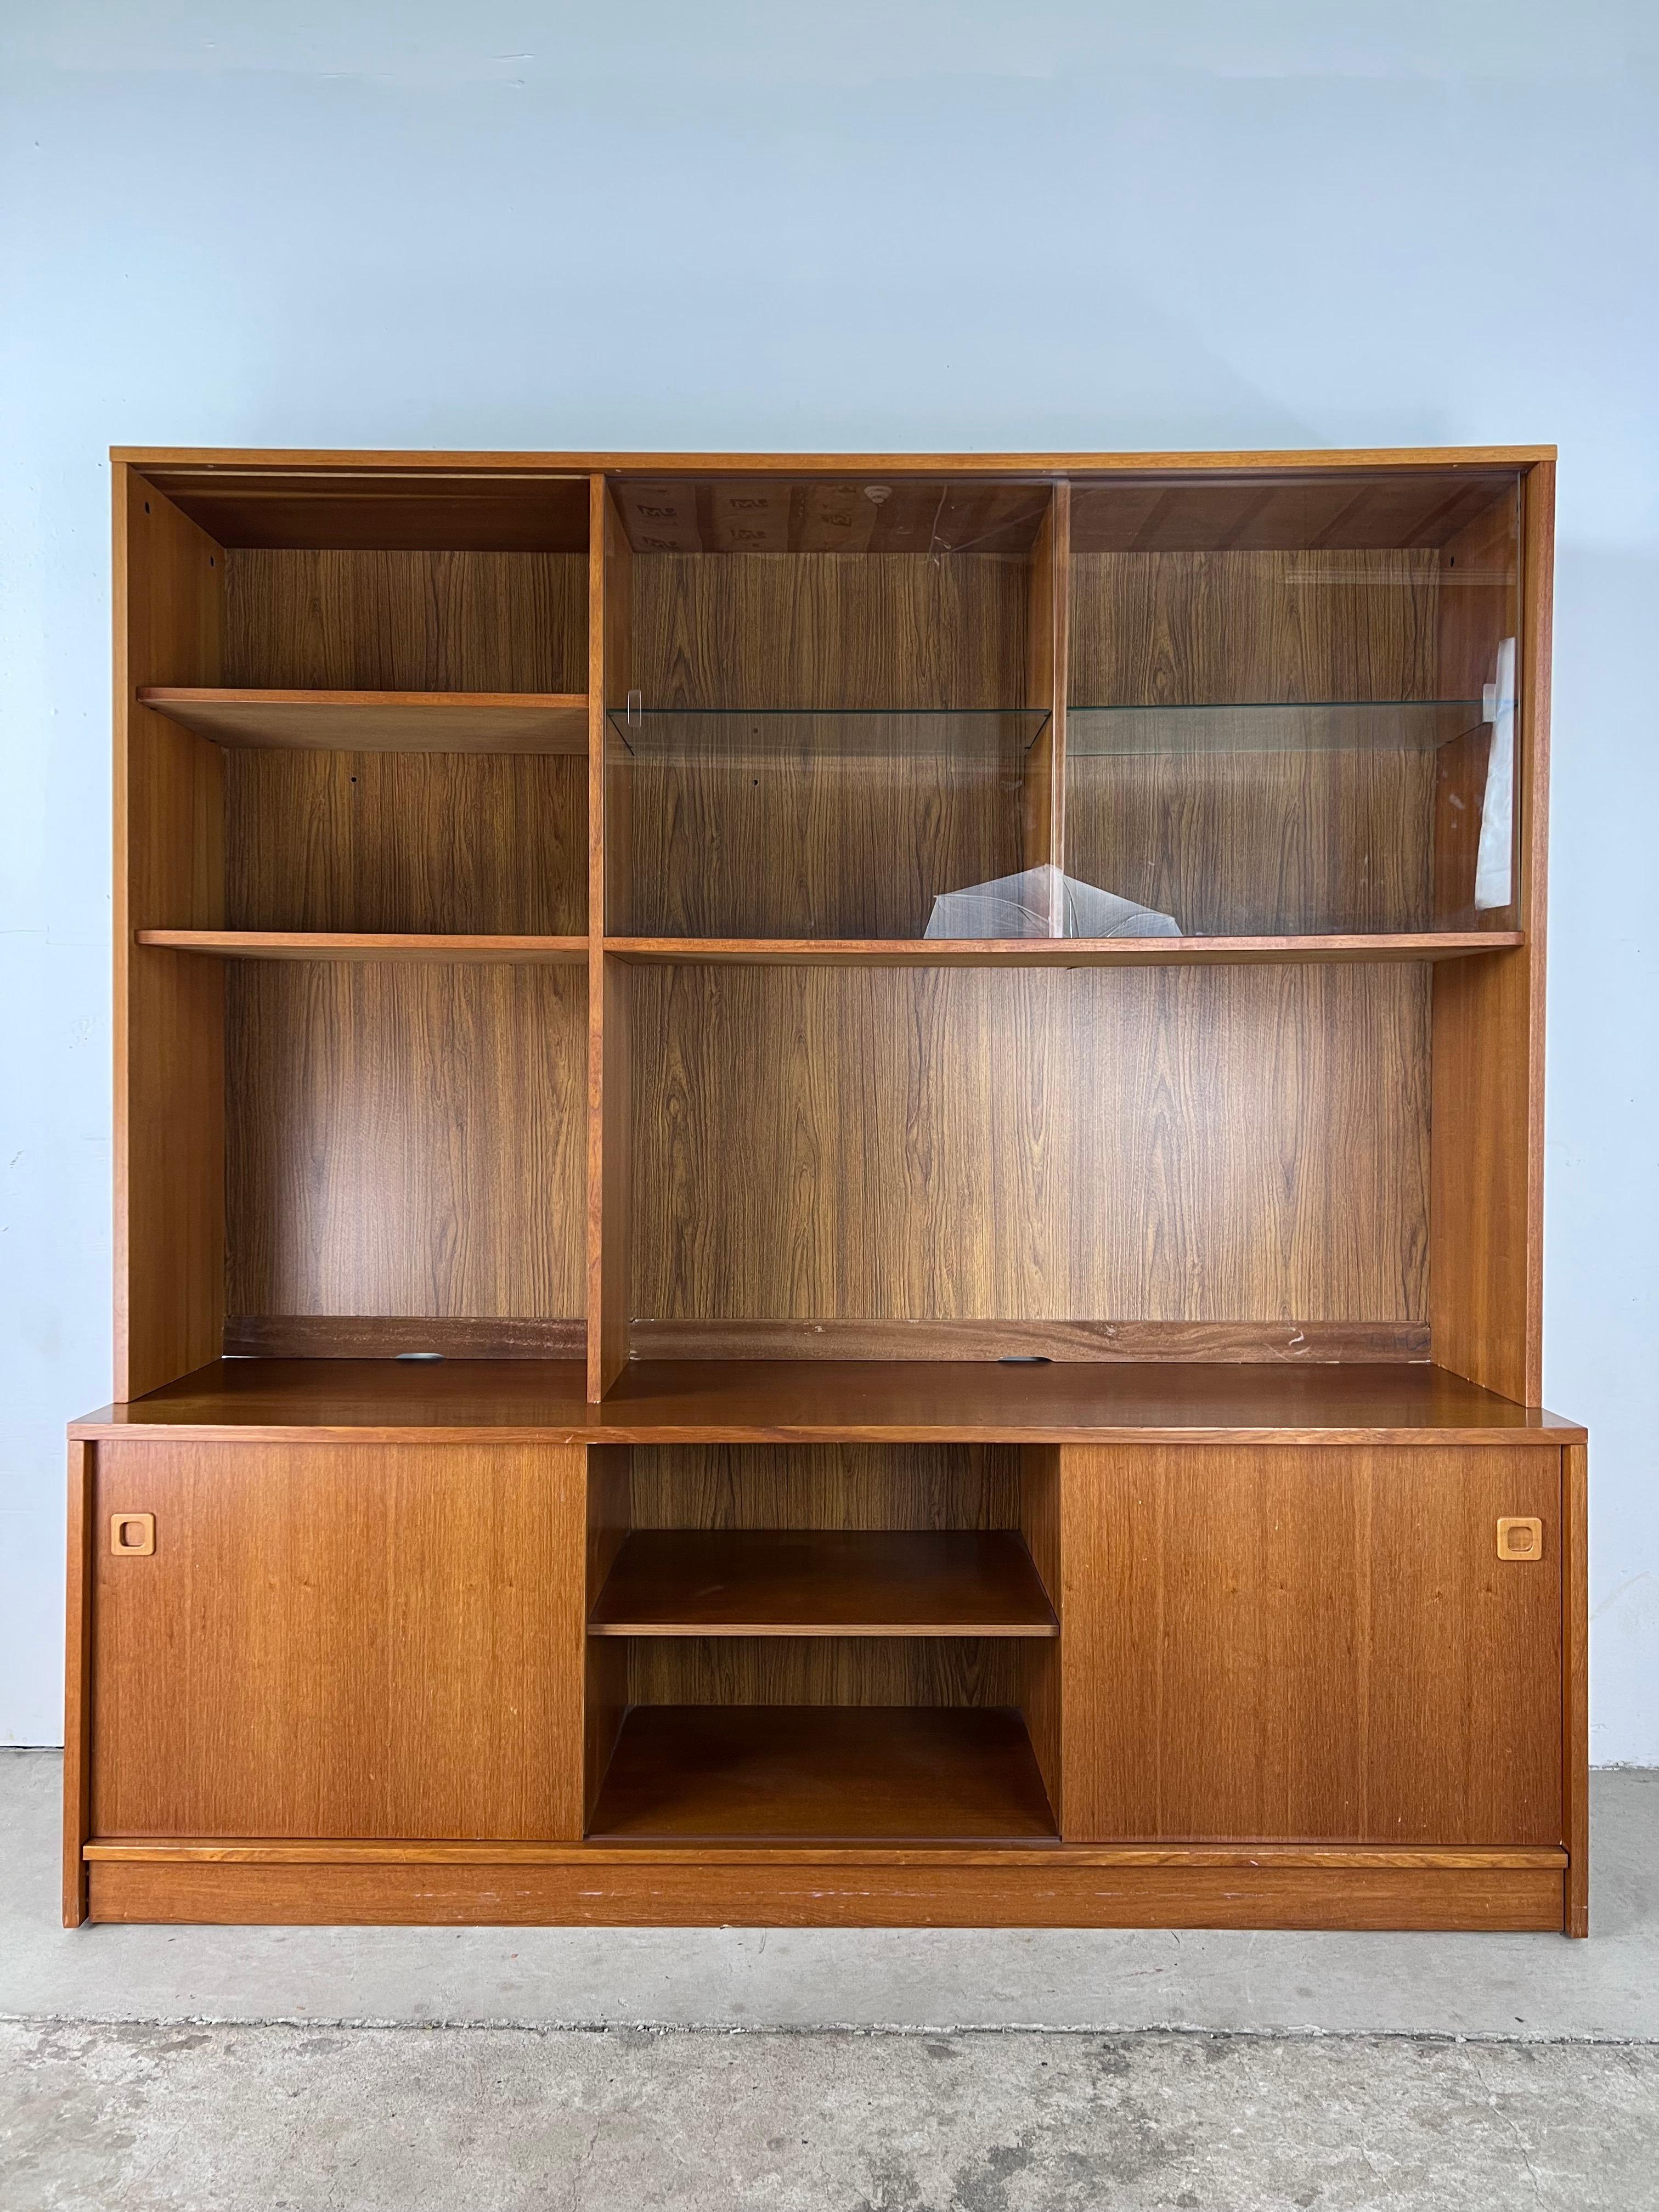 This Danish modern shelving unit features pressed wood construction, teak veneer with original finish, two piece design for easy redecorating, adjustable shelves and sliding glass doors up top, adjustable shelves and sliding wood doors down